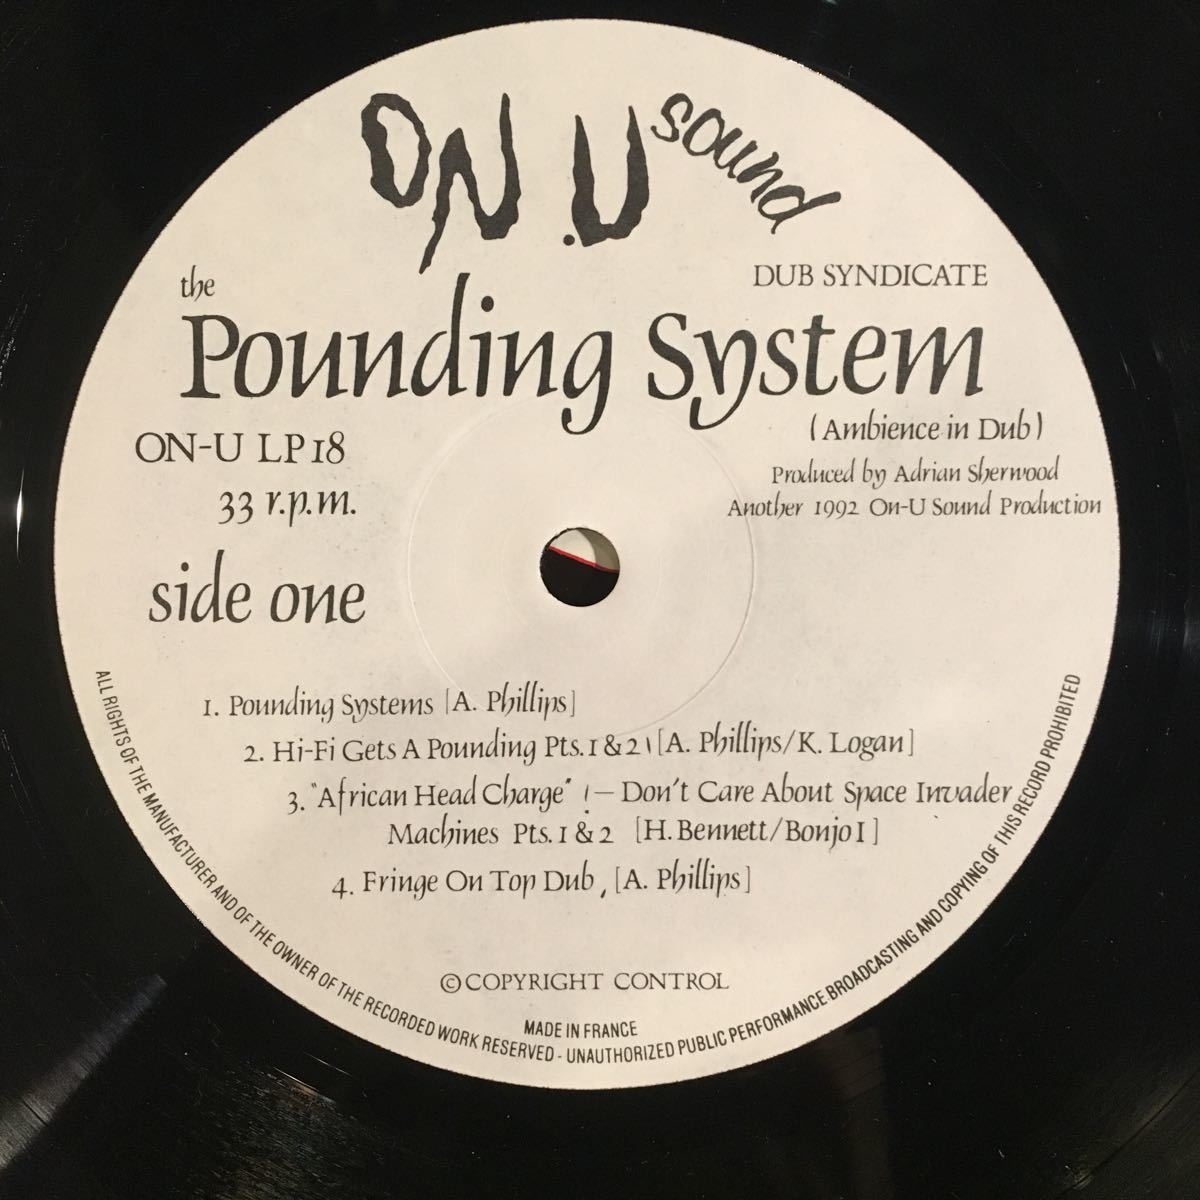 The Dub Syndicate The Pounding System (Ambience In Dub)_画像3